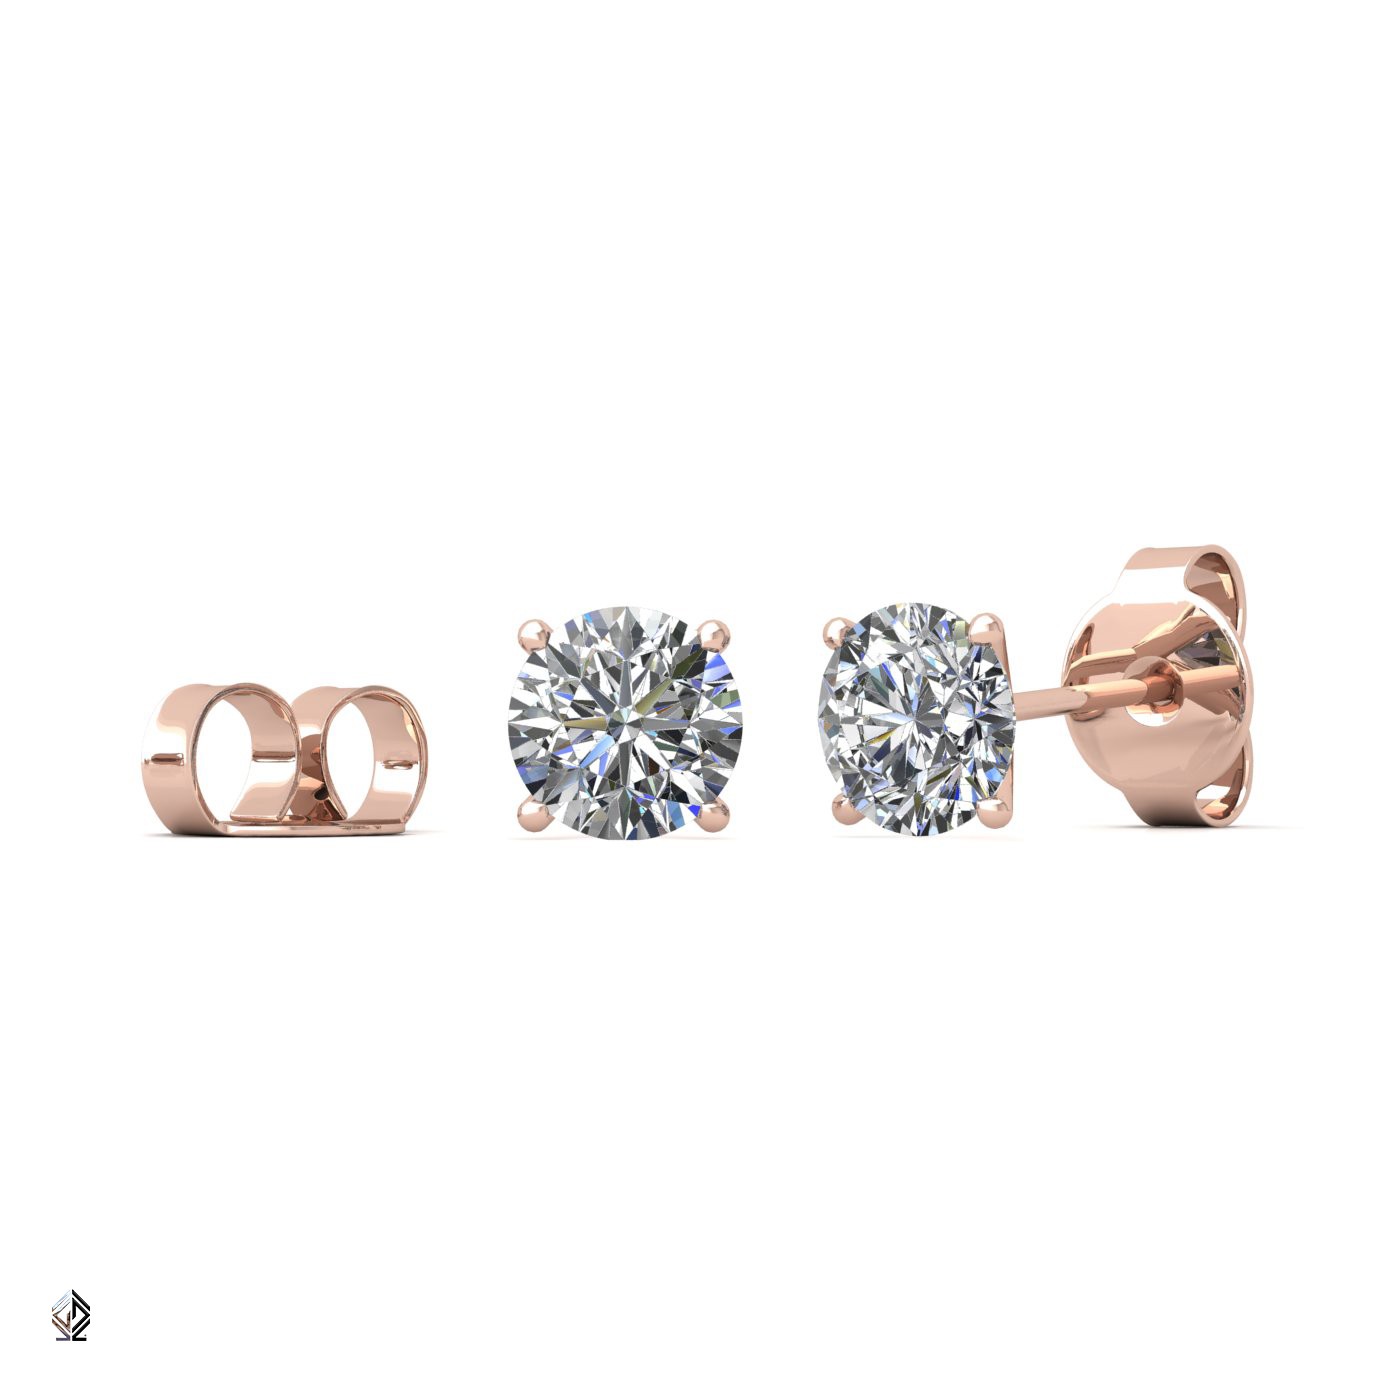 18k rose gold 1.0 ct each (2,0 tcw) 4 prongs round cut classic diamond earring studs Photos & images